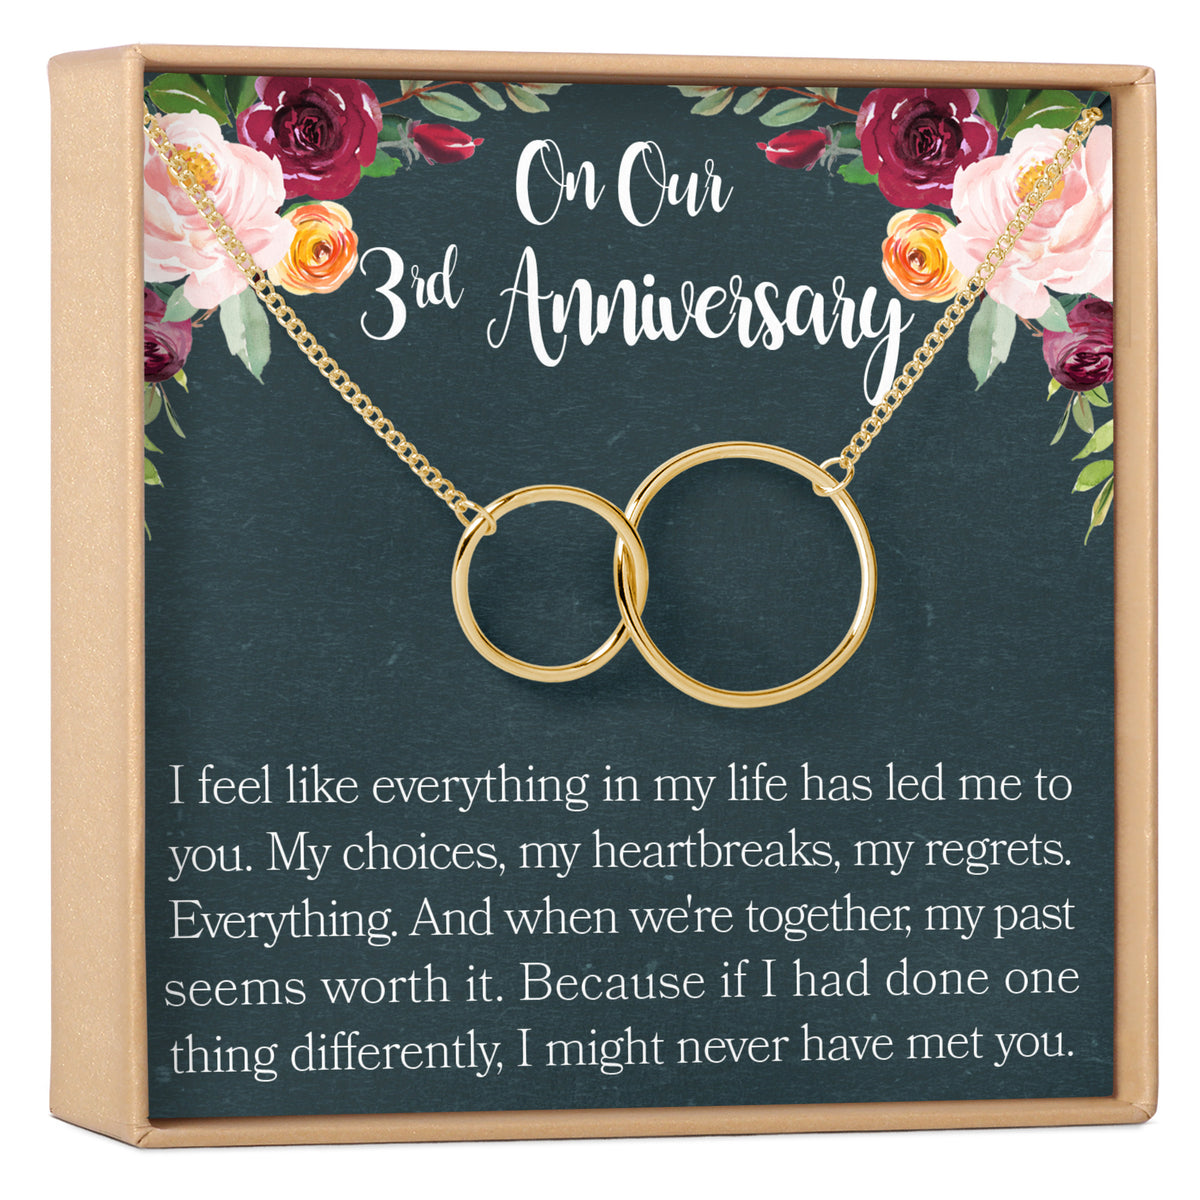 3rd Anniversary Necklace - Dear Ava, Jewelry / Necklaces / Pendants